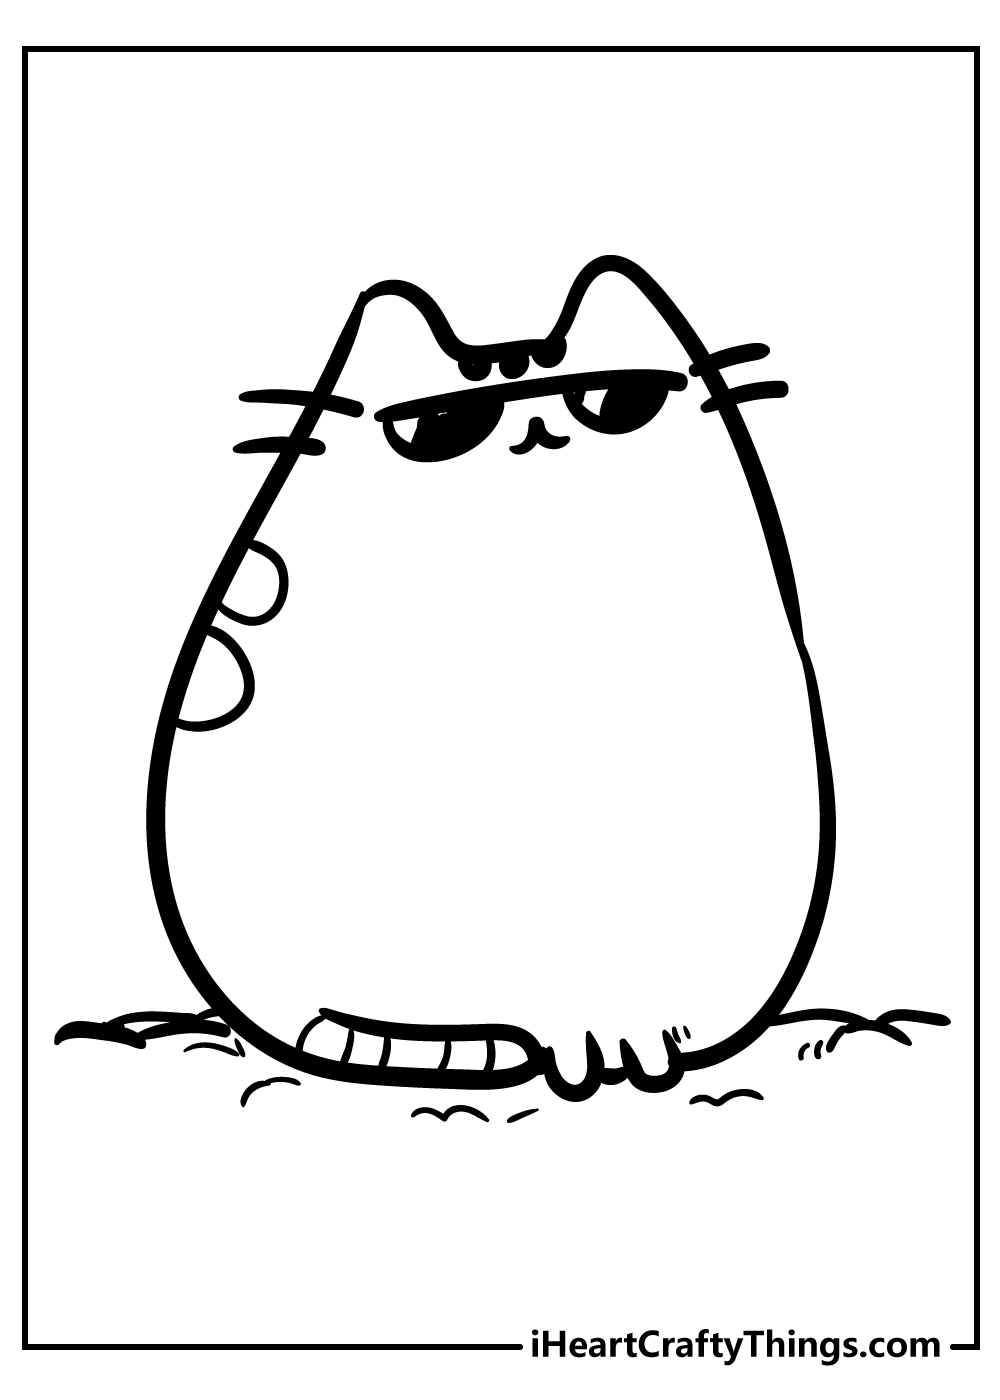 Pusheen Coloring Pages Updated 20